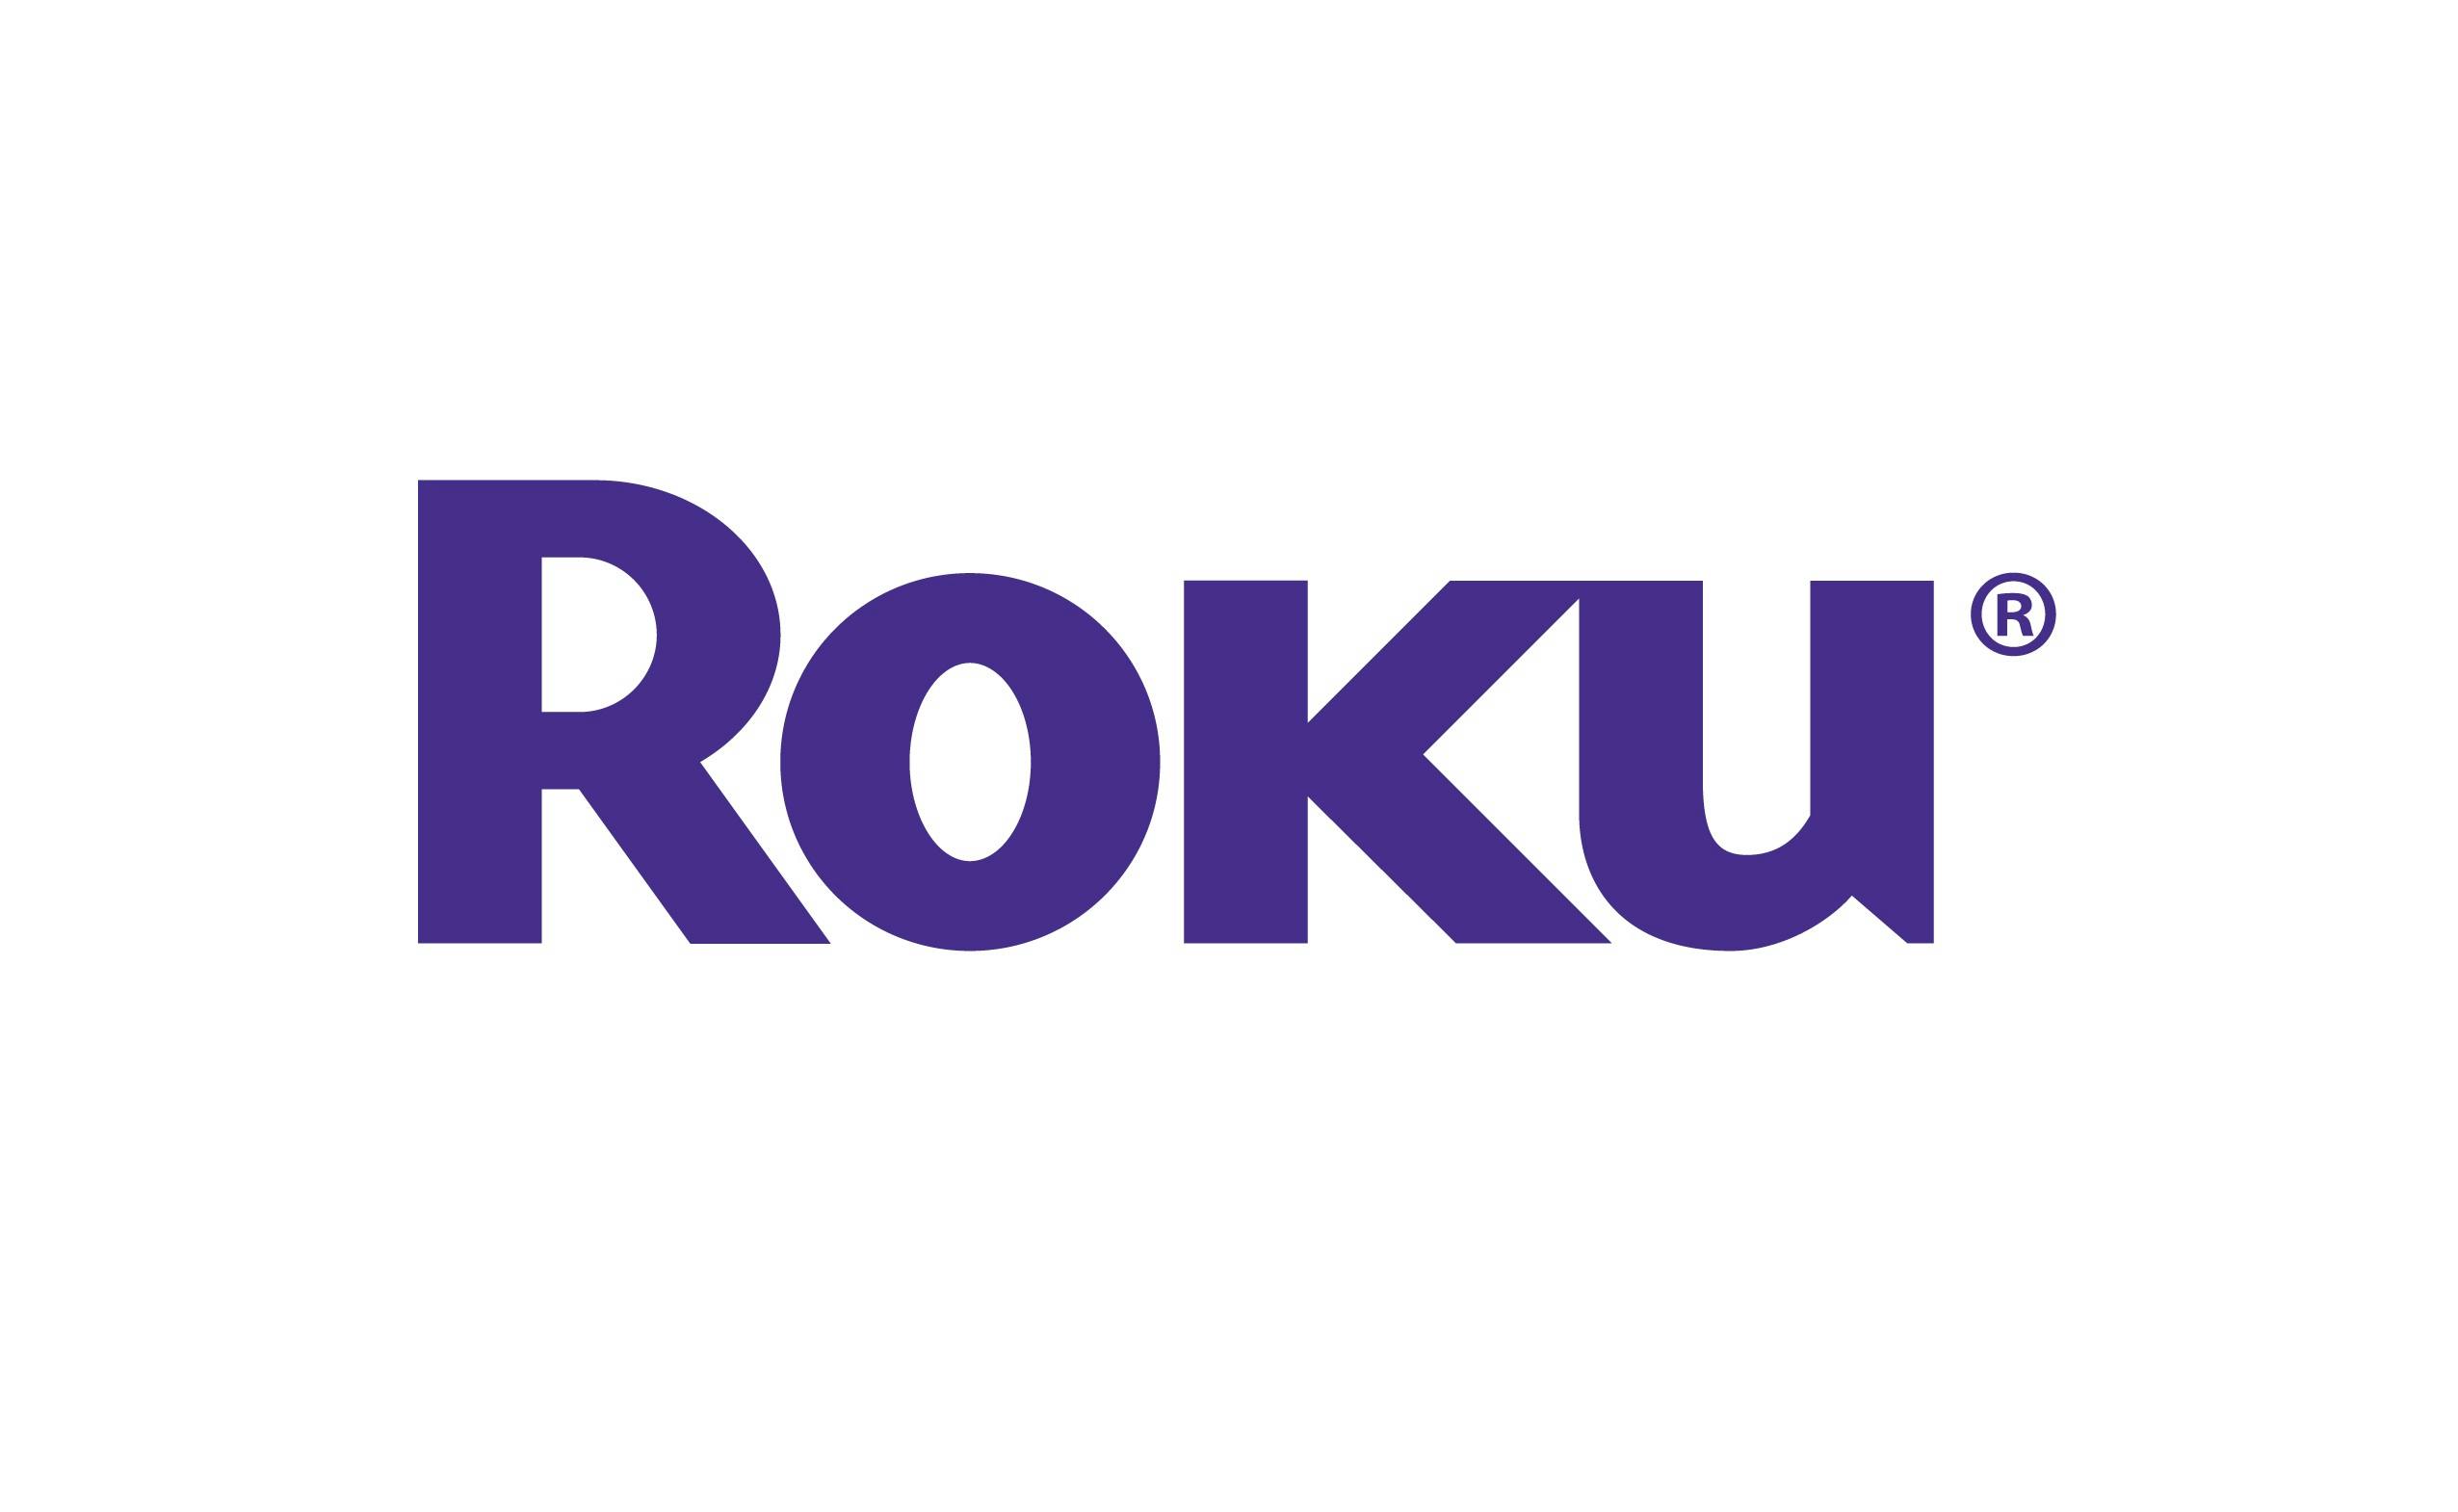 Long on Roku Even if they Miss Q1 Earnings